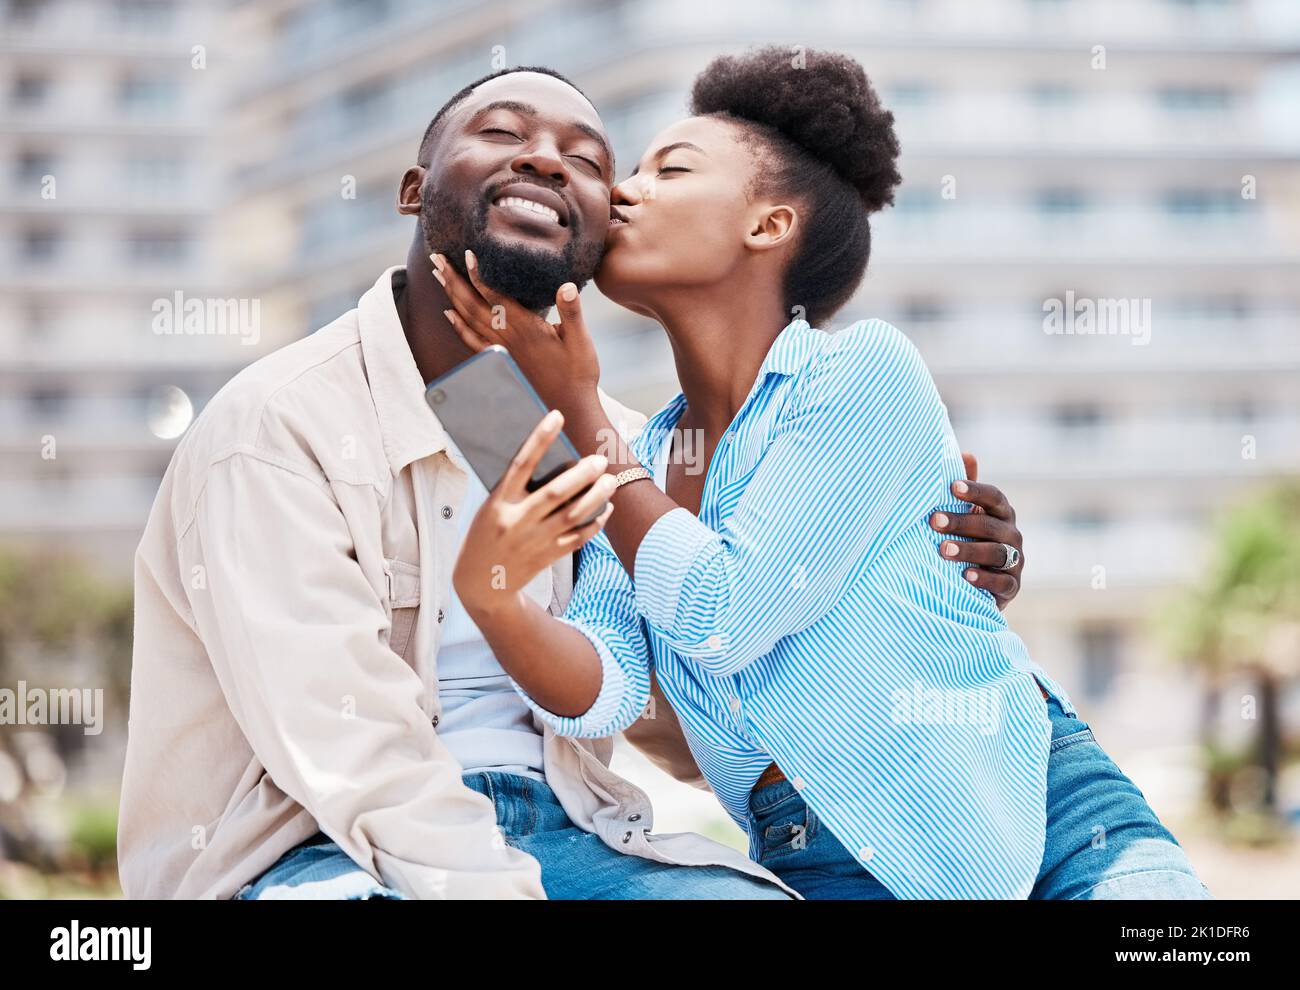 Love, kiss and couple take phone selfie on romantic date together, happy and smile while relax outdoors on summer holiday. Black woman and man on a Stock Photo